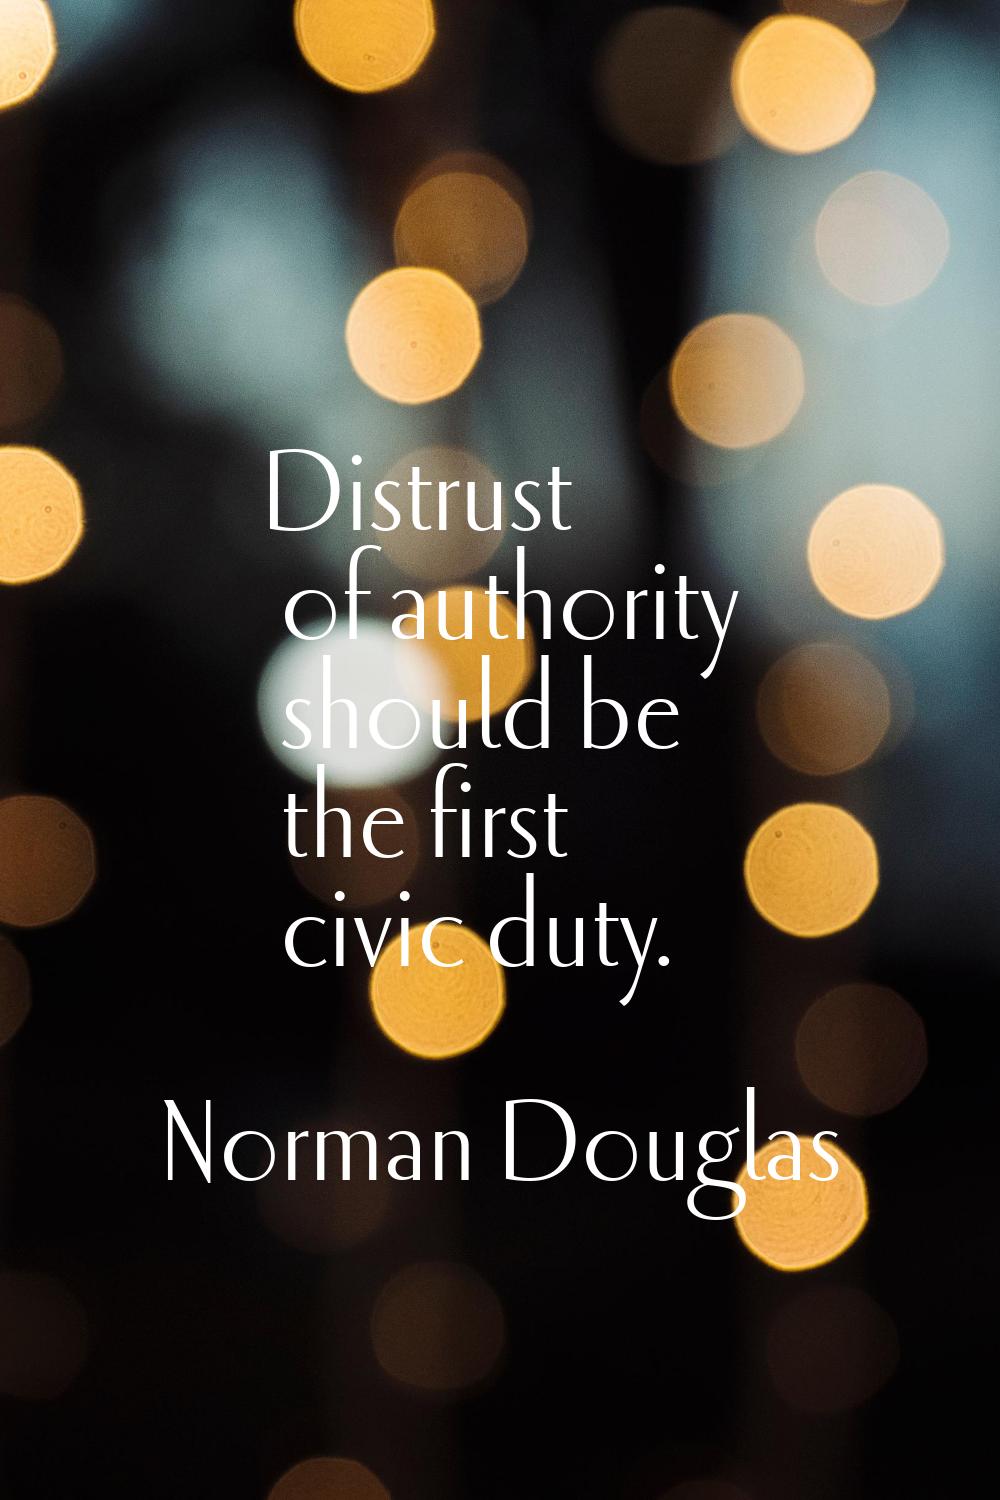 Distrust of authority should be the first civic duty.